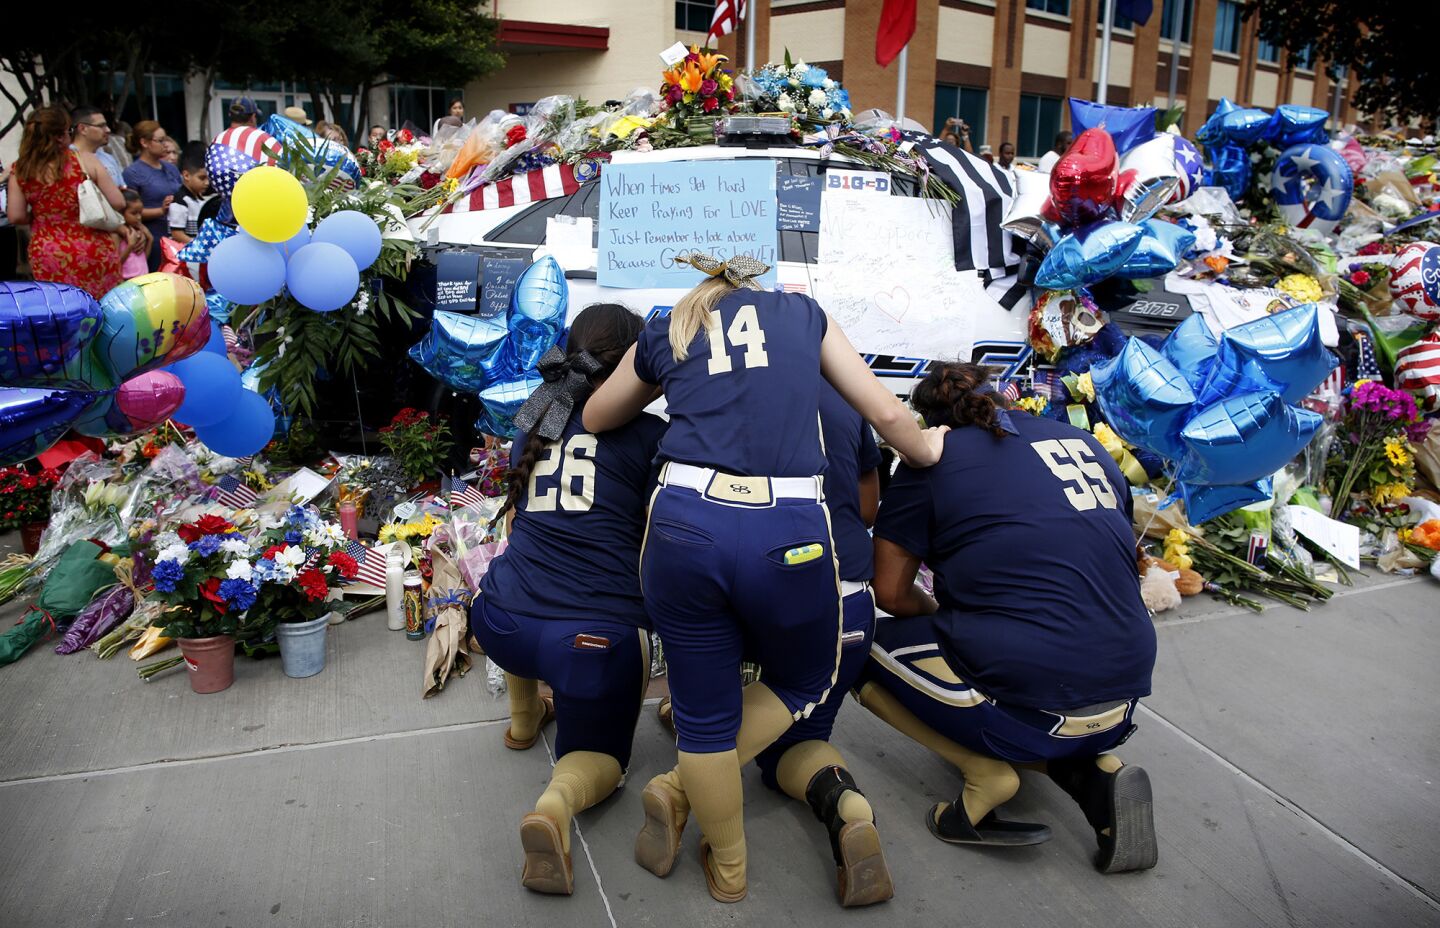 The MVPz, a Central Texas, Softball Team, pray in front of the Dallas Police Headquarters.